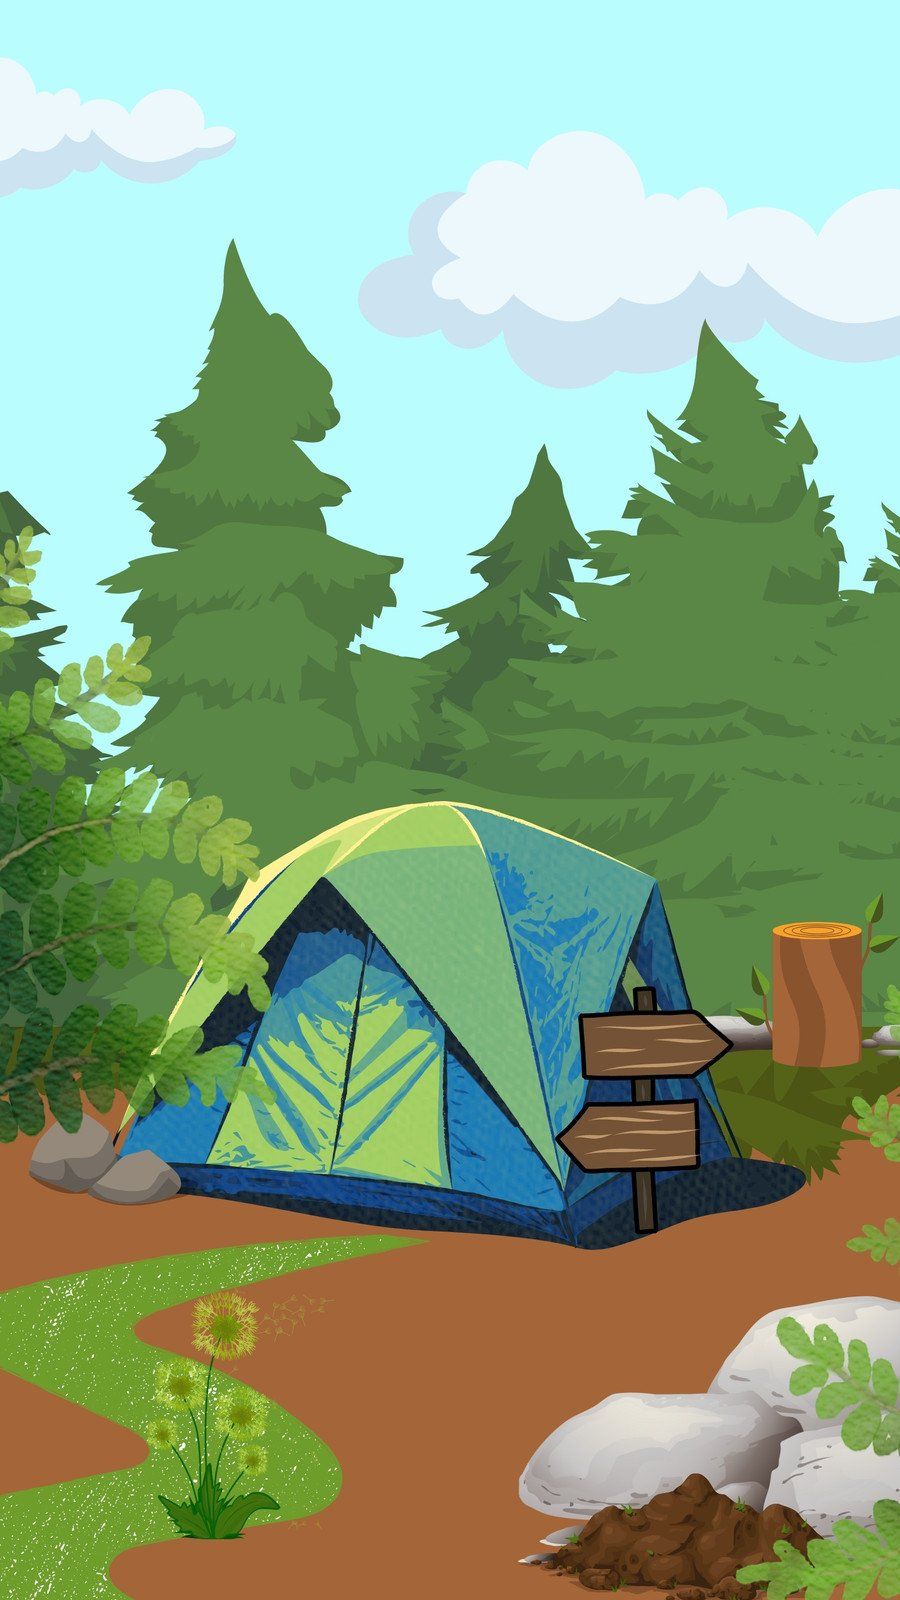 A tent in the woods - Camping